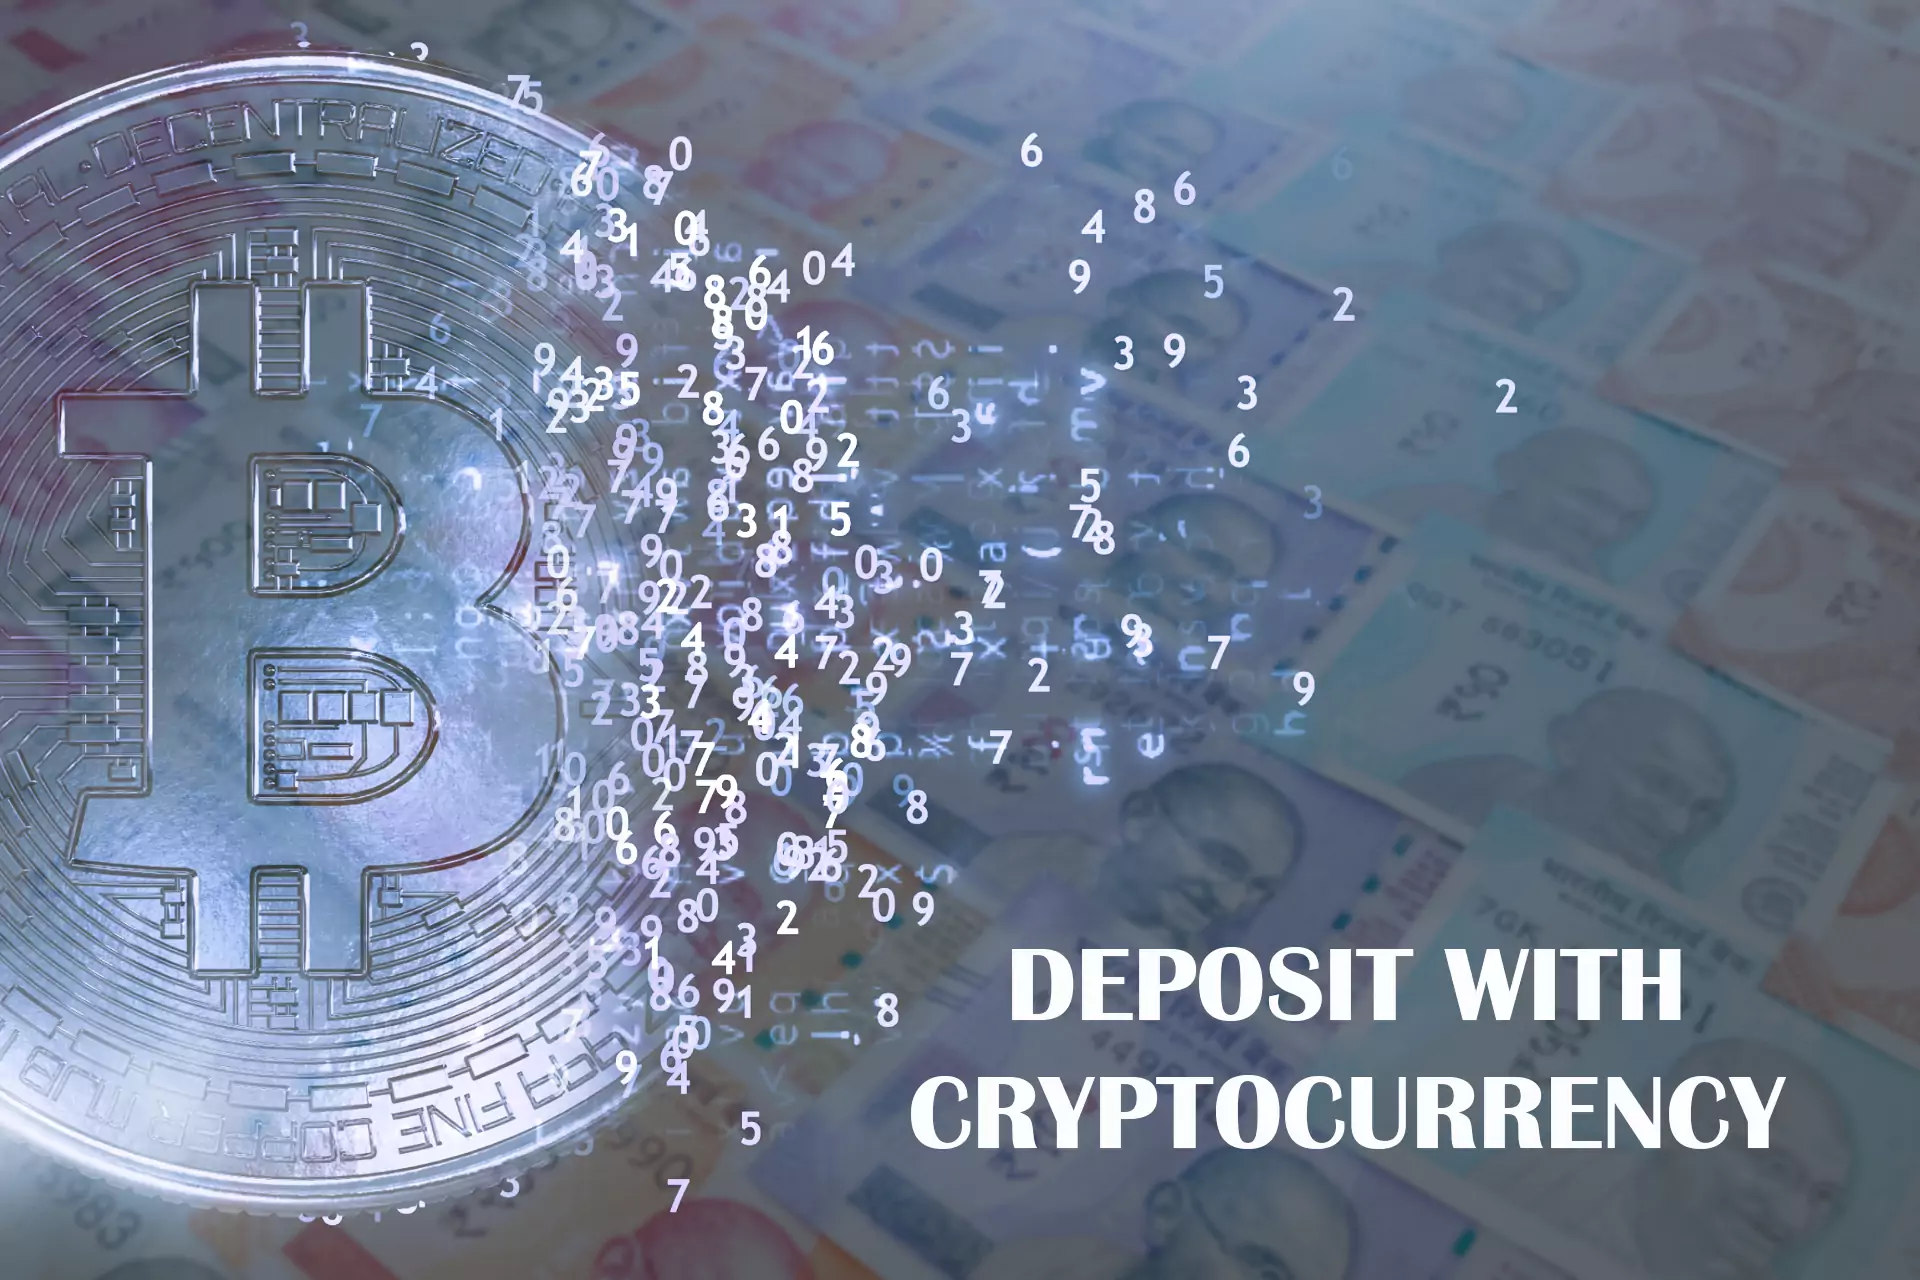 Some betting sites allow depositing using cryptocurrency.